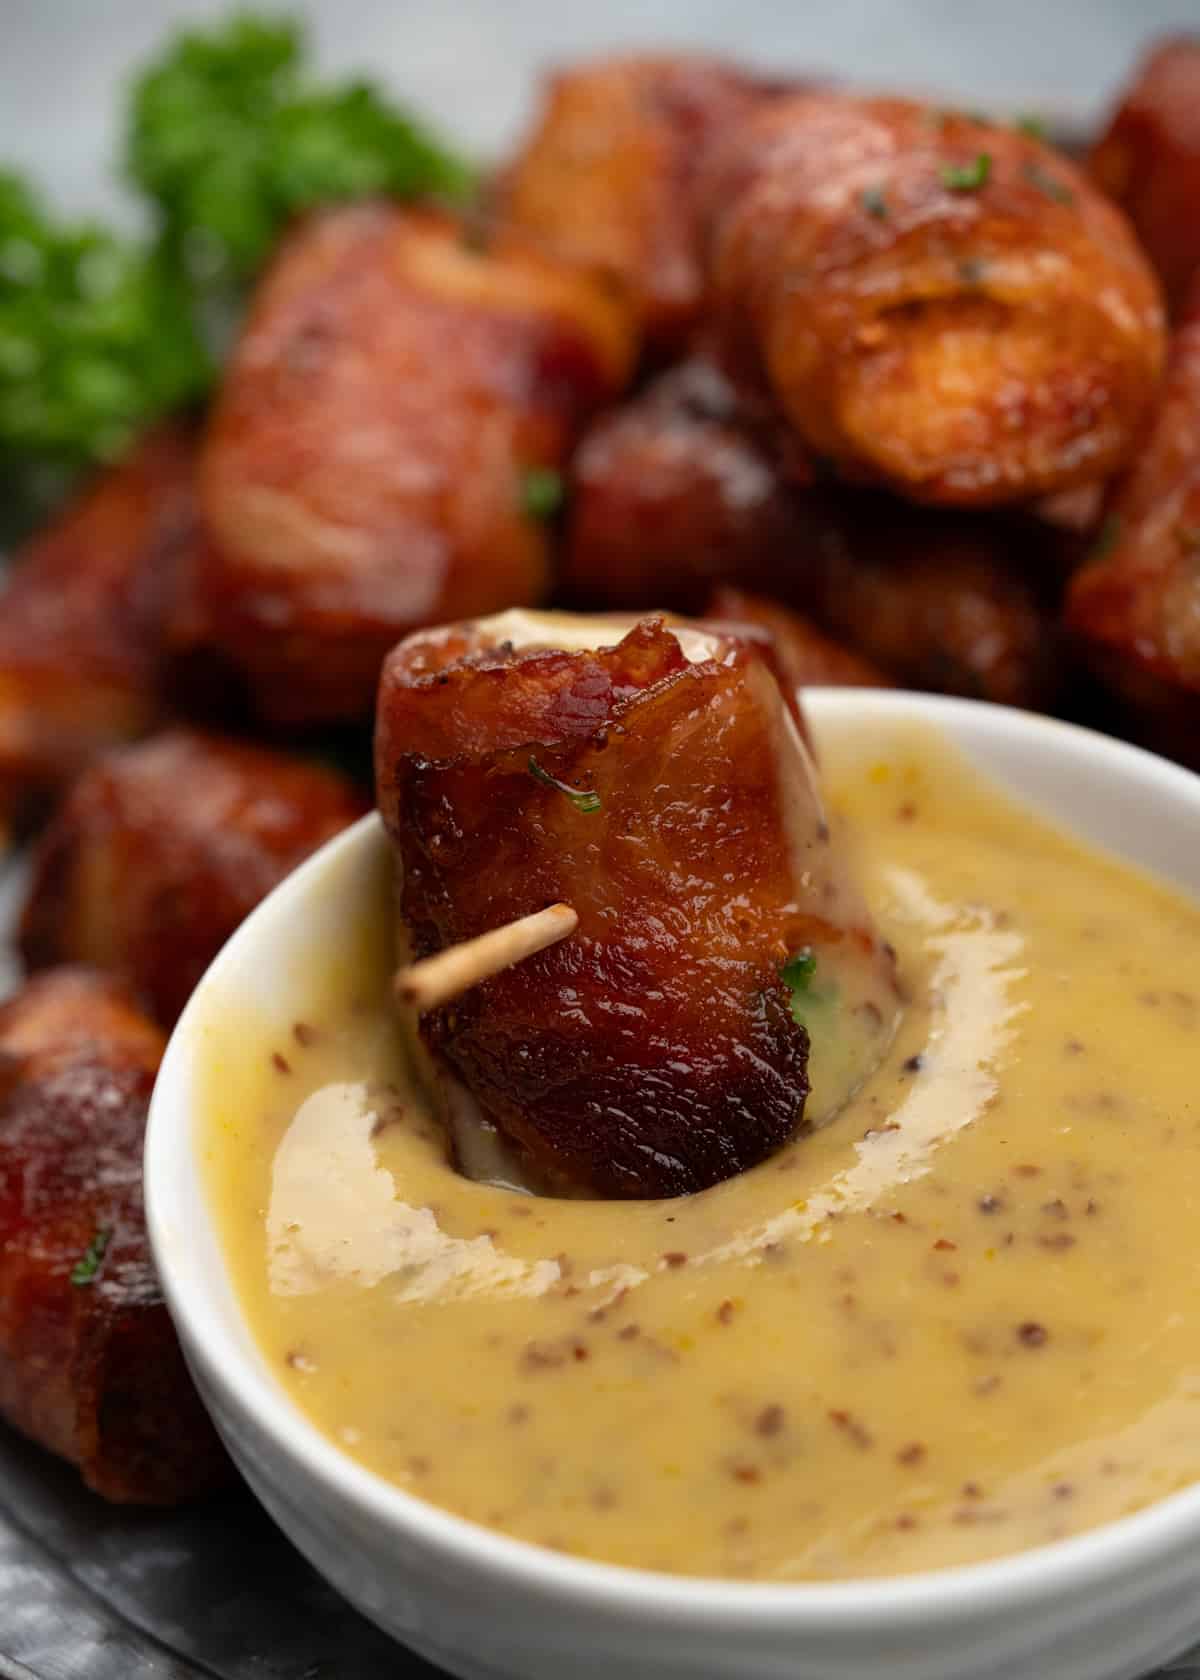 Bacon wrapped chicken bites dipped in honey mustard sauce
